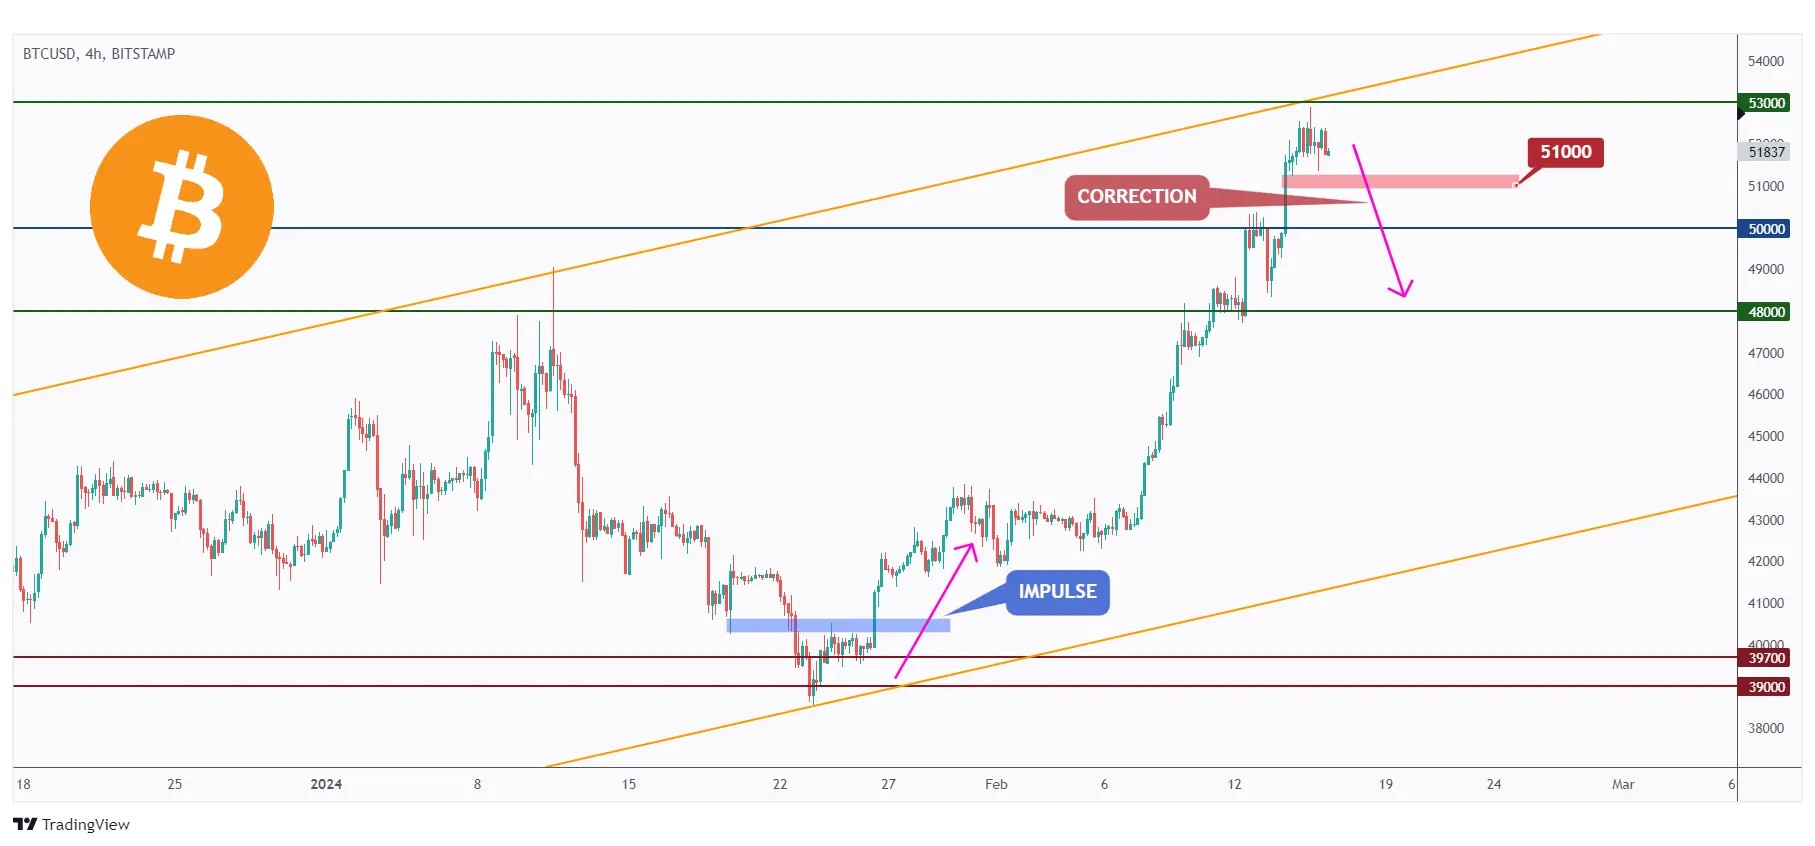 BTC 4h chart showing the overall bullish trend. however it is hovering around the upper bound of the channel and resistance at $53,000.